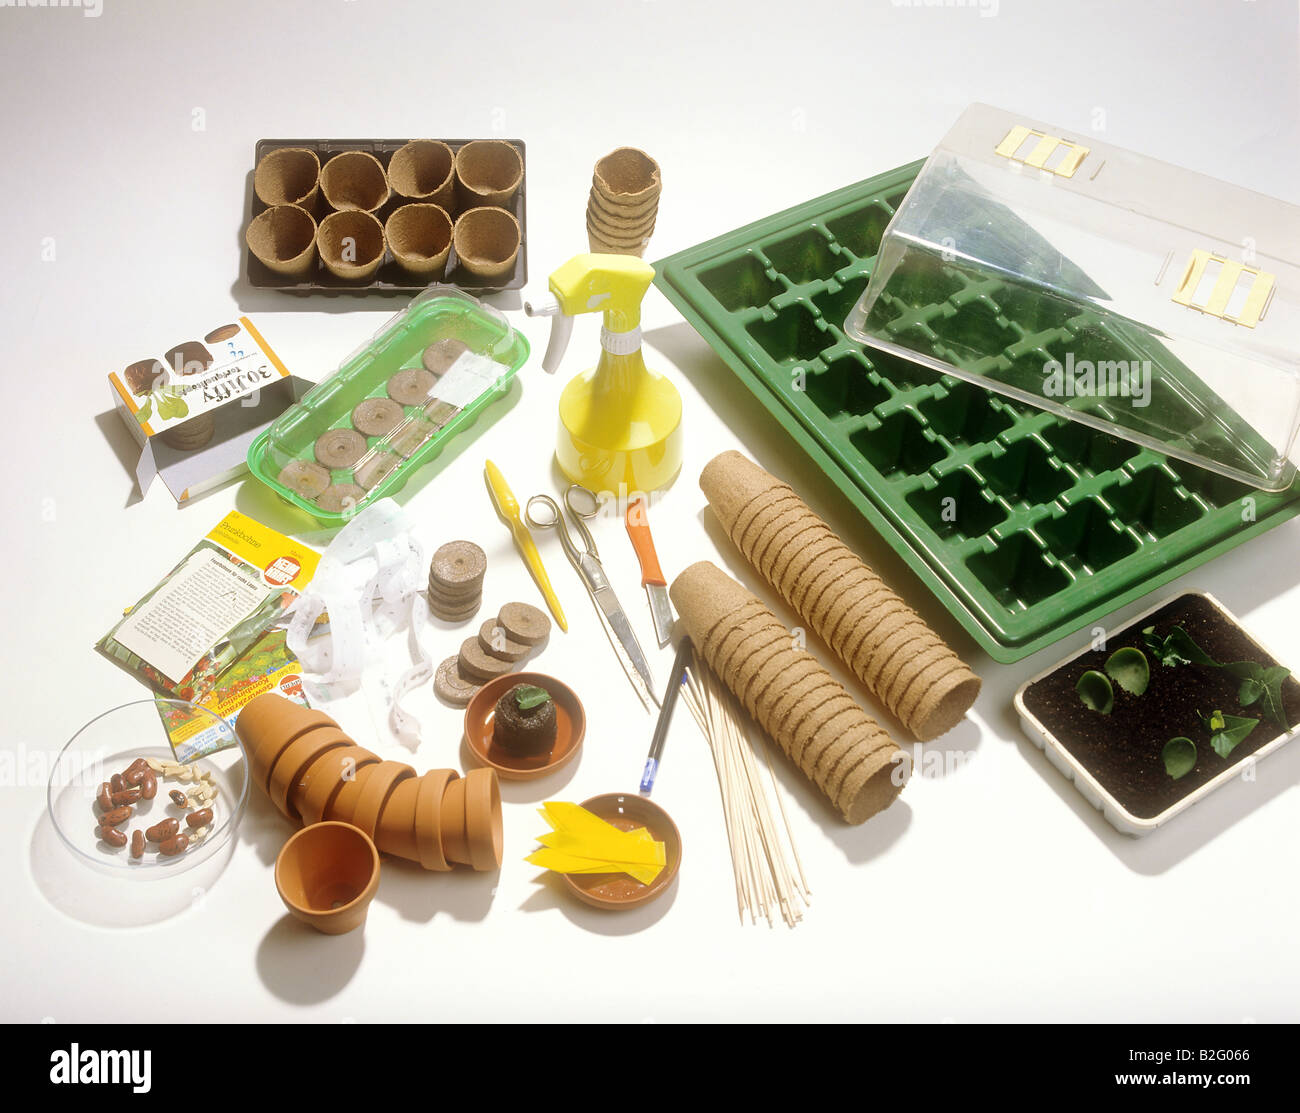 accessory for cultivating plants Stock Photo